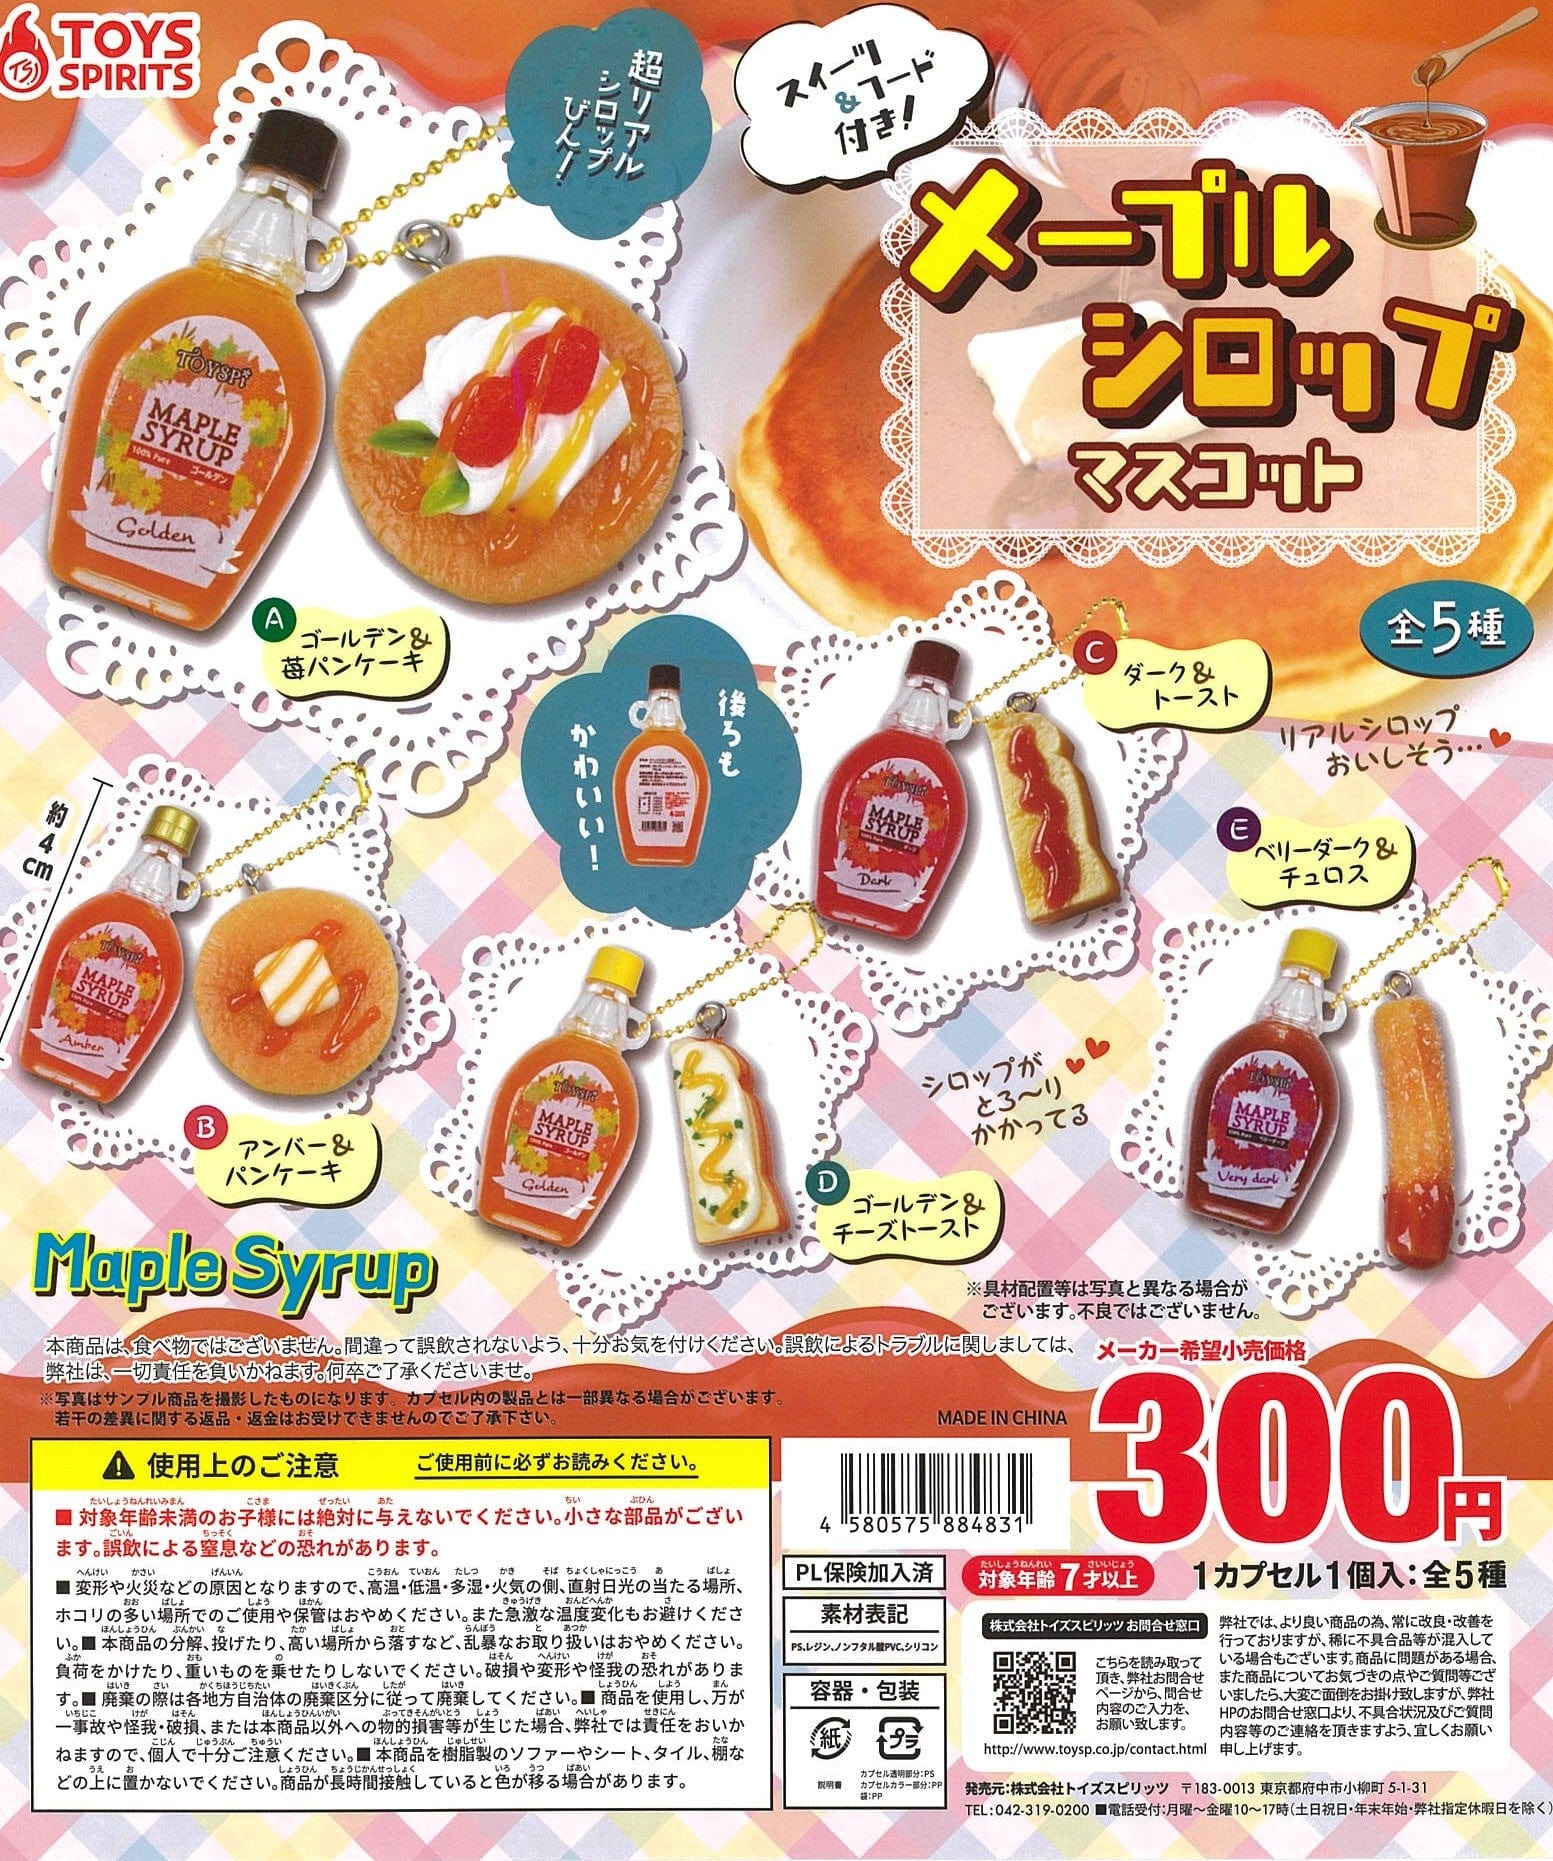 TOYS SPIRITS CP2284 Delicious Maple Syrup